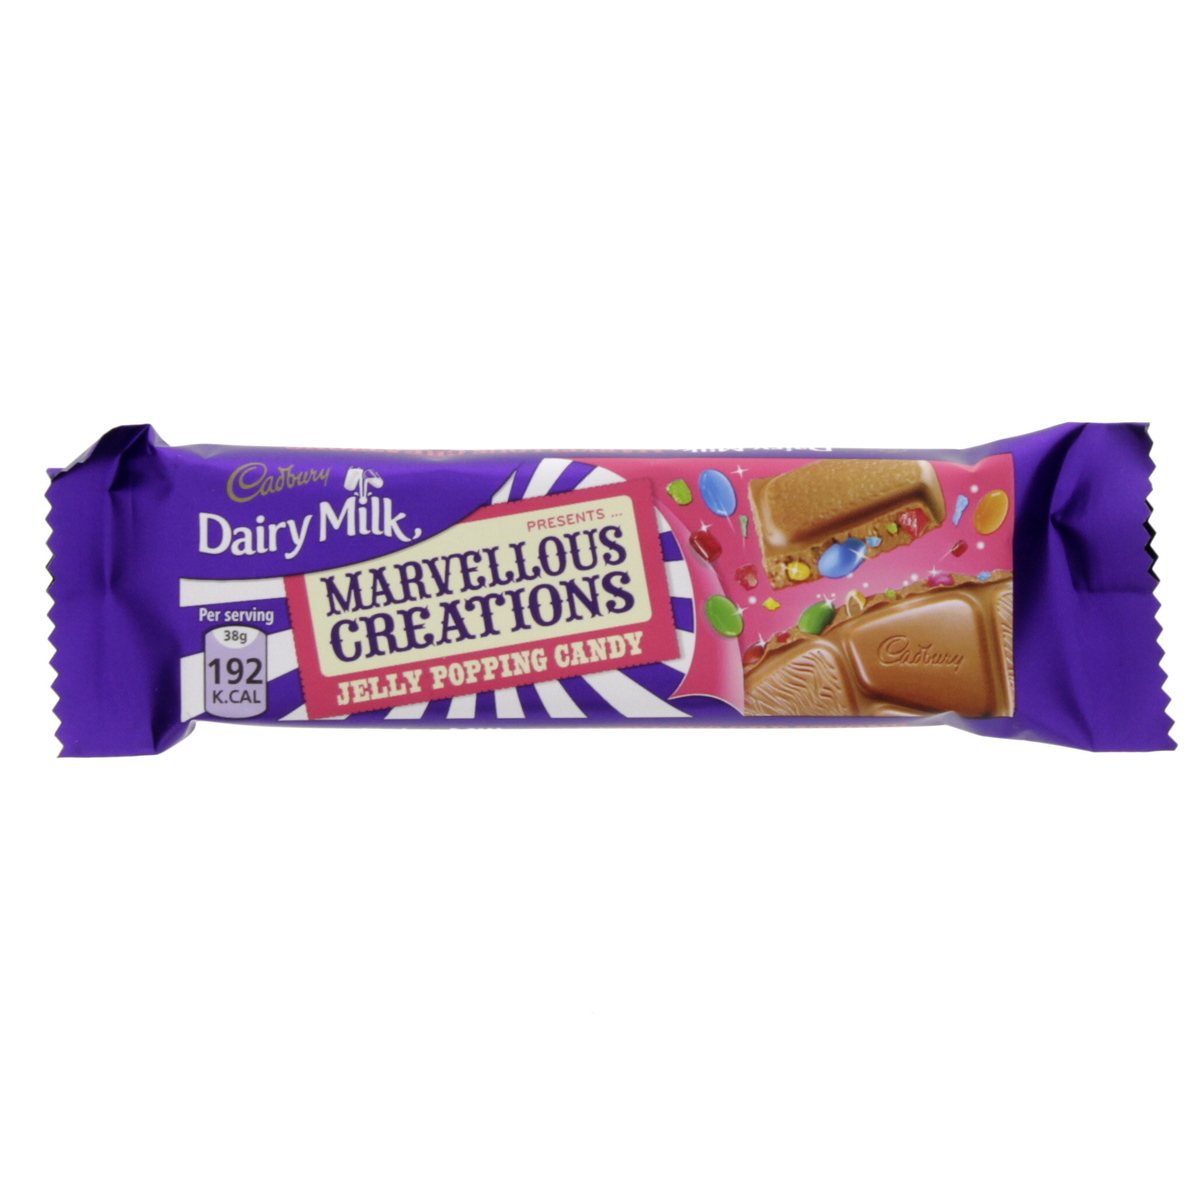 Cadbury Dairy Milk Marvelous Creations Jelly Popping Candy 12 x 38g ...